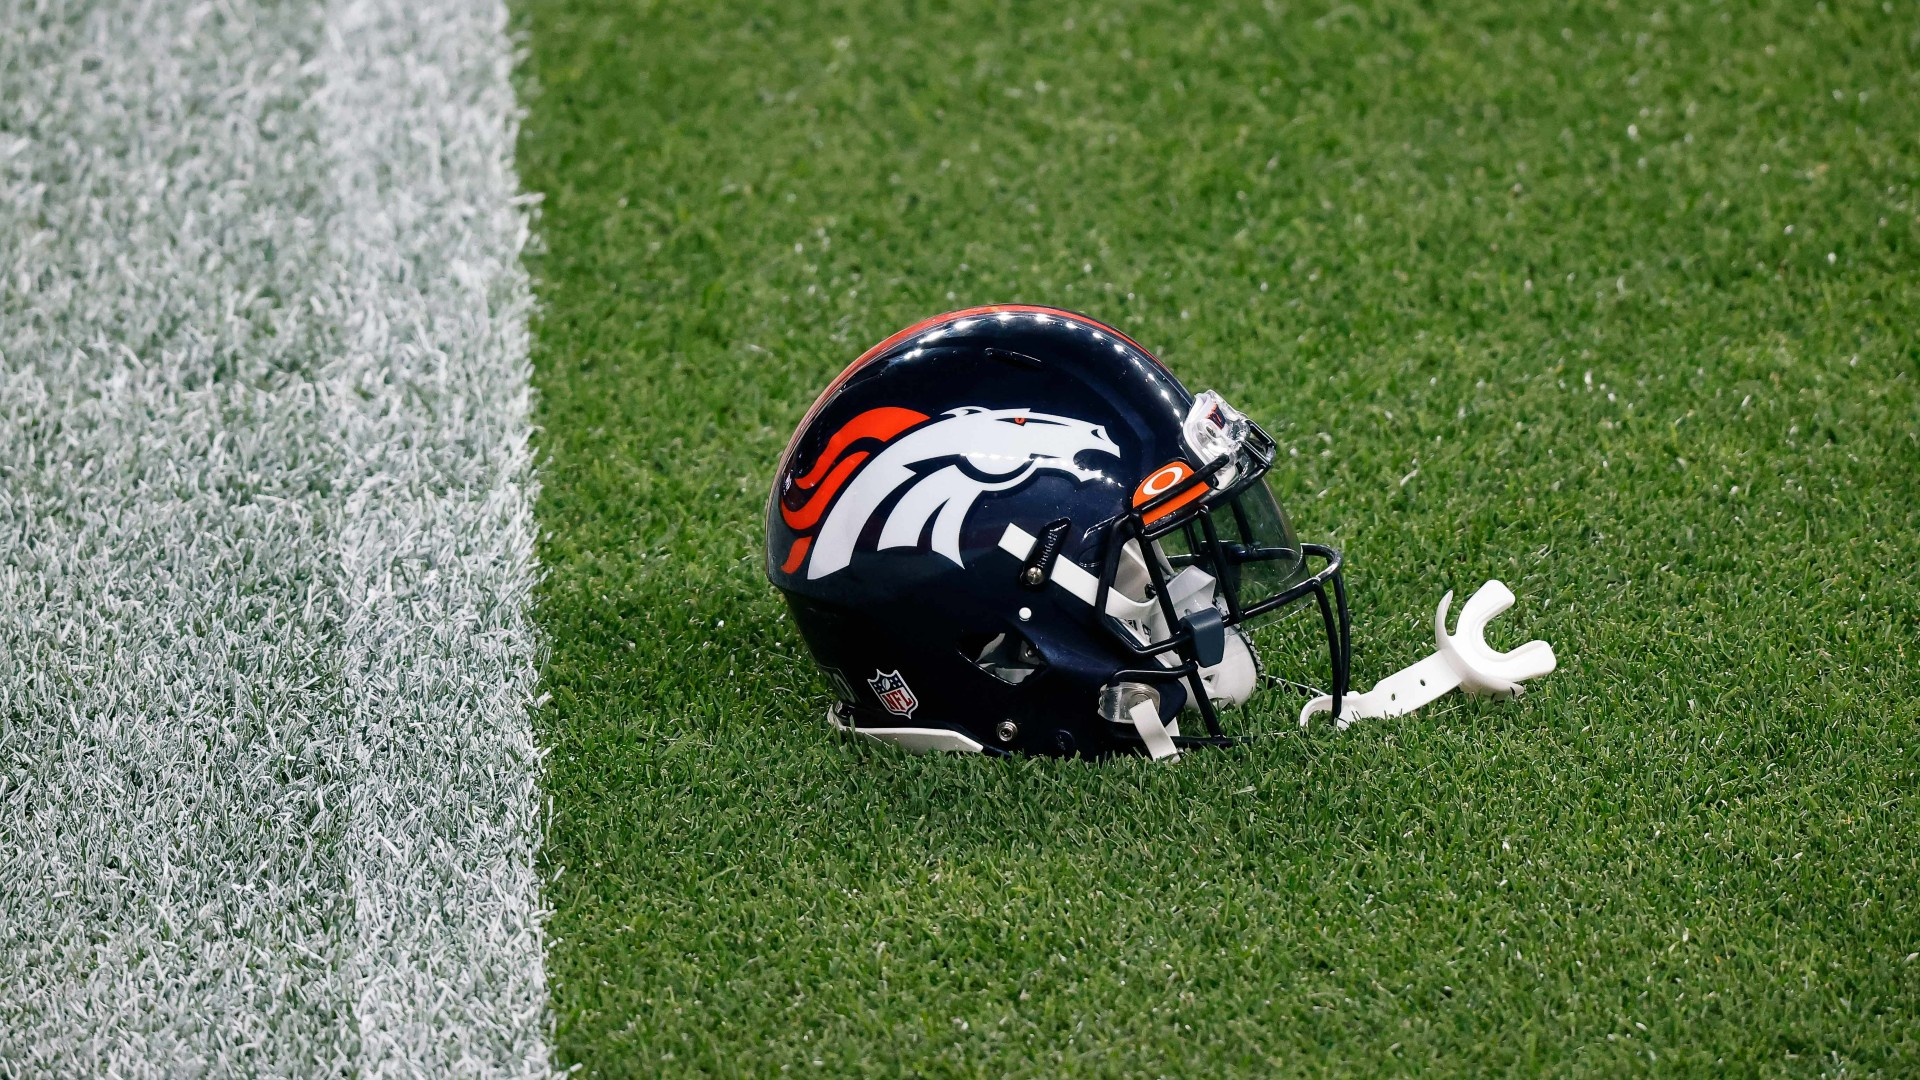 Walmart Heirs Agree to Buy the Denver Broncos in Record-Shattering Deal Reported at .65 Billion